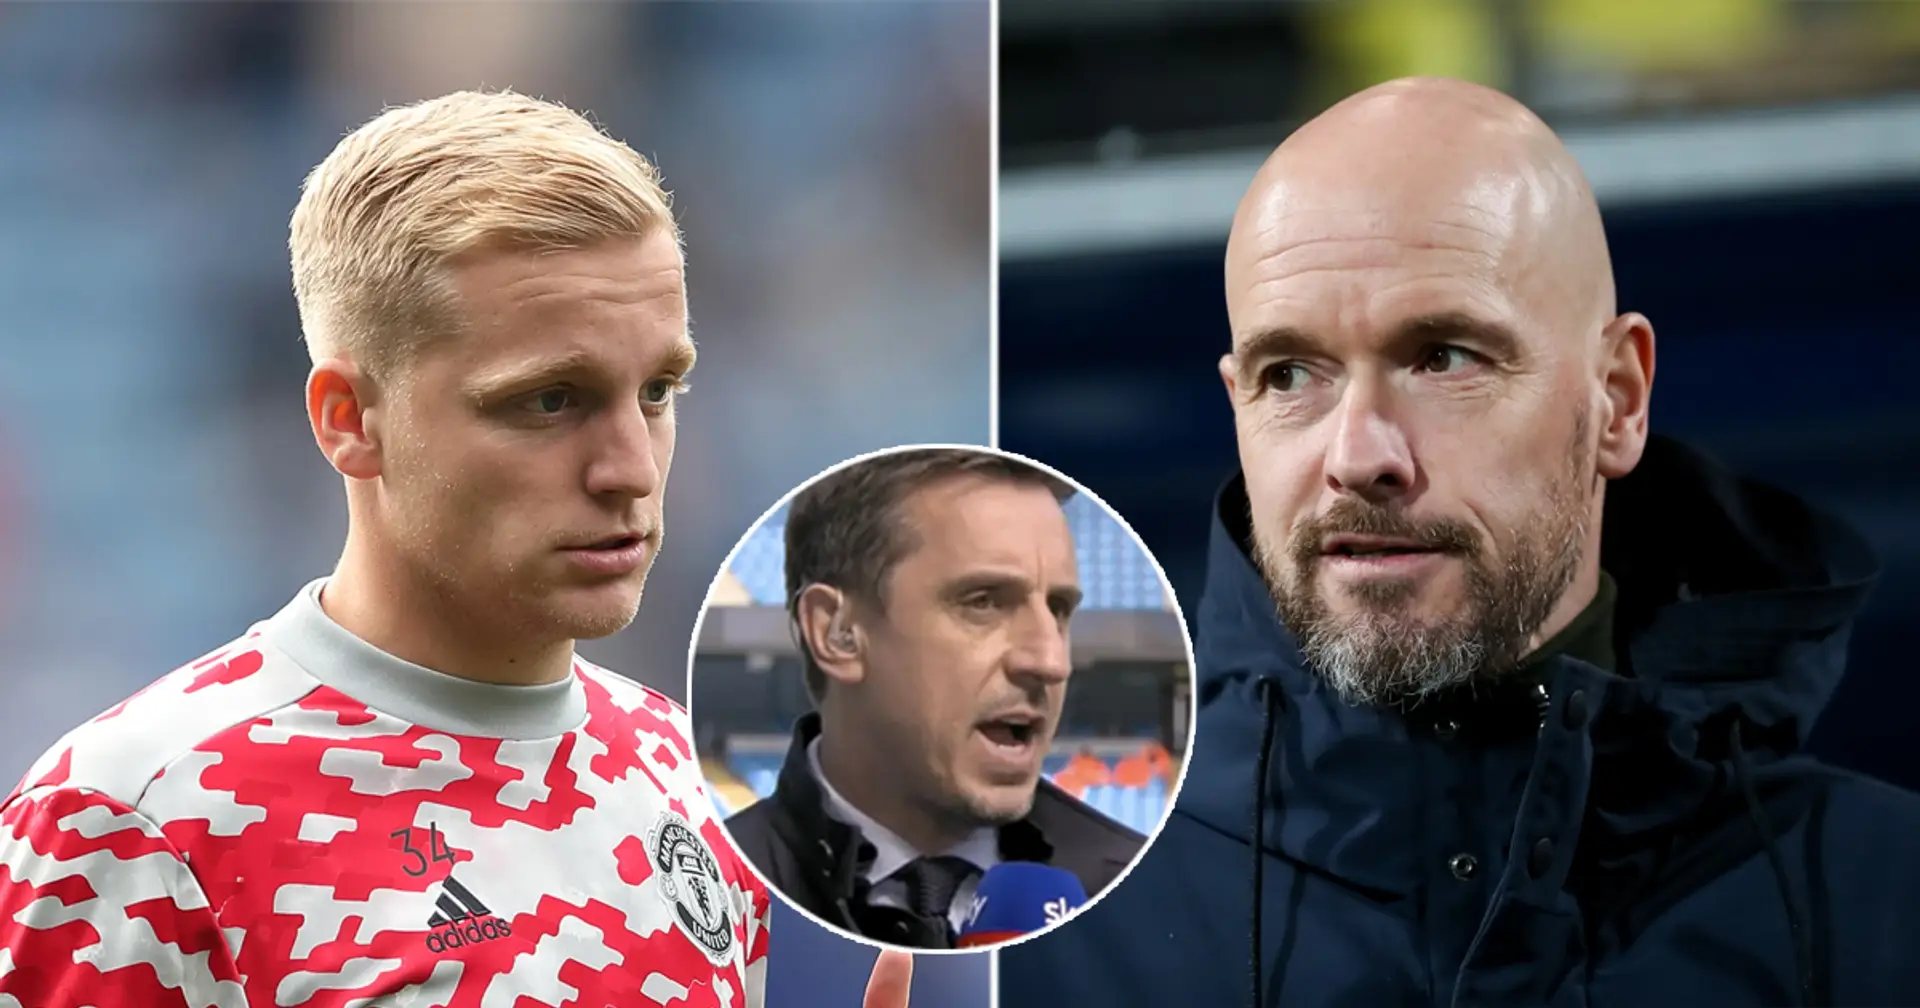 Gary Neville explains why Erik ten Hag might snub United - and what Donny van de Beek has to do with it